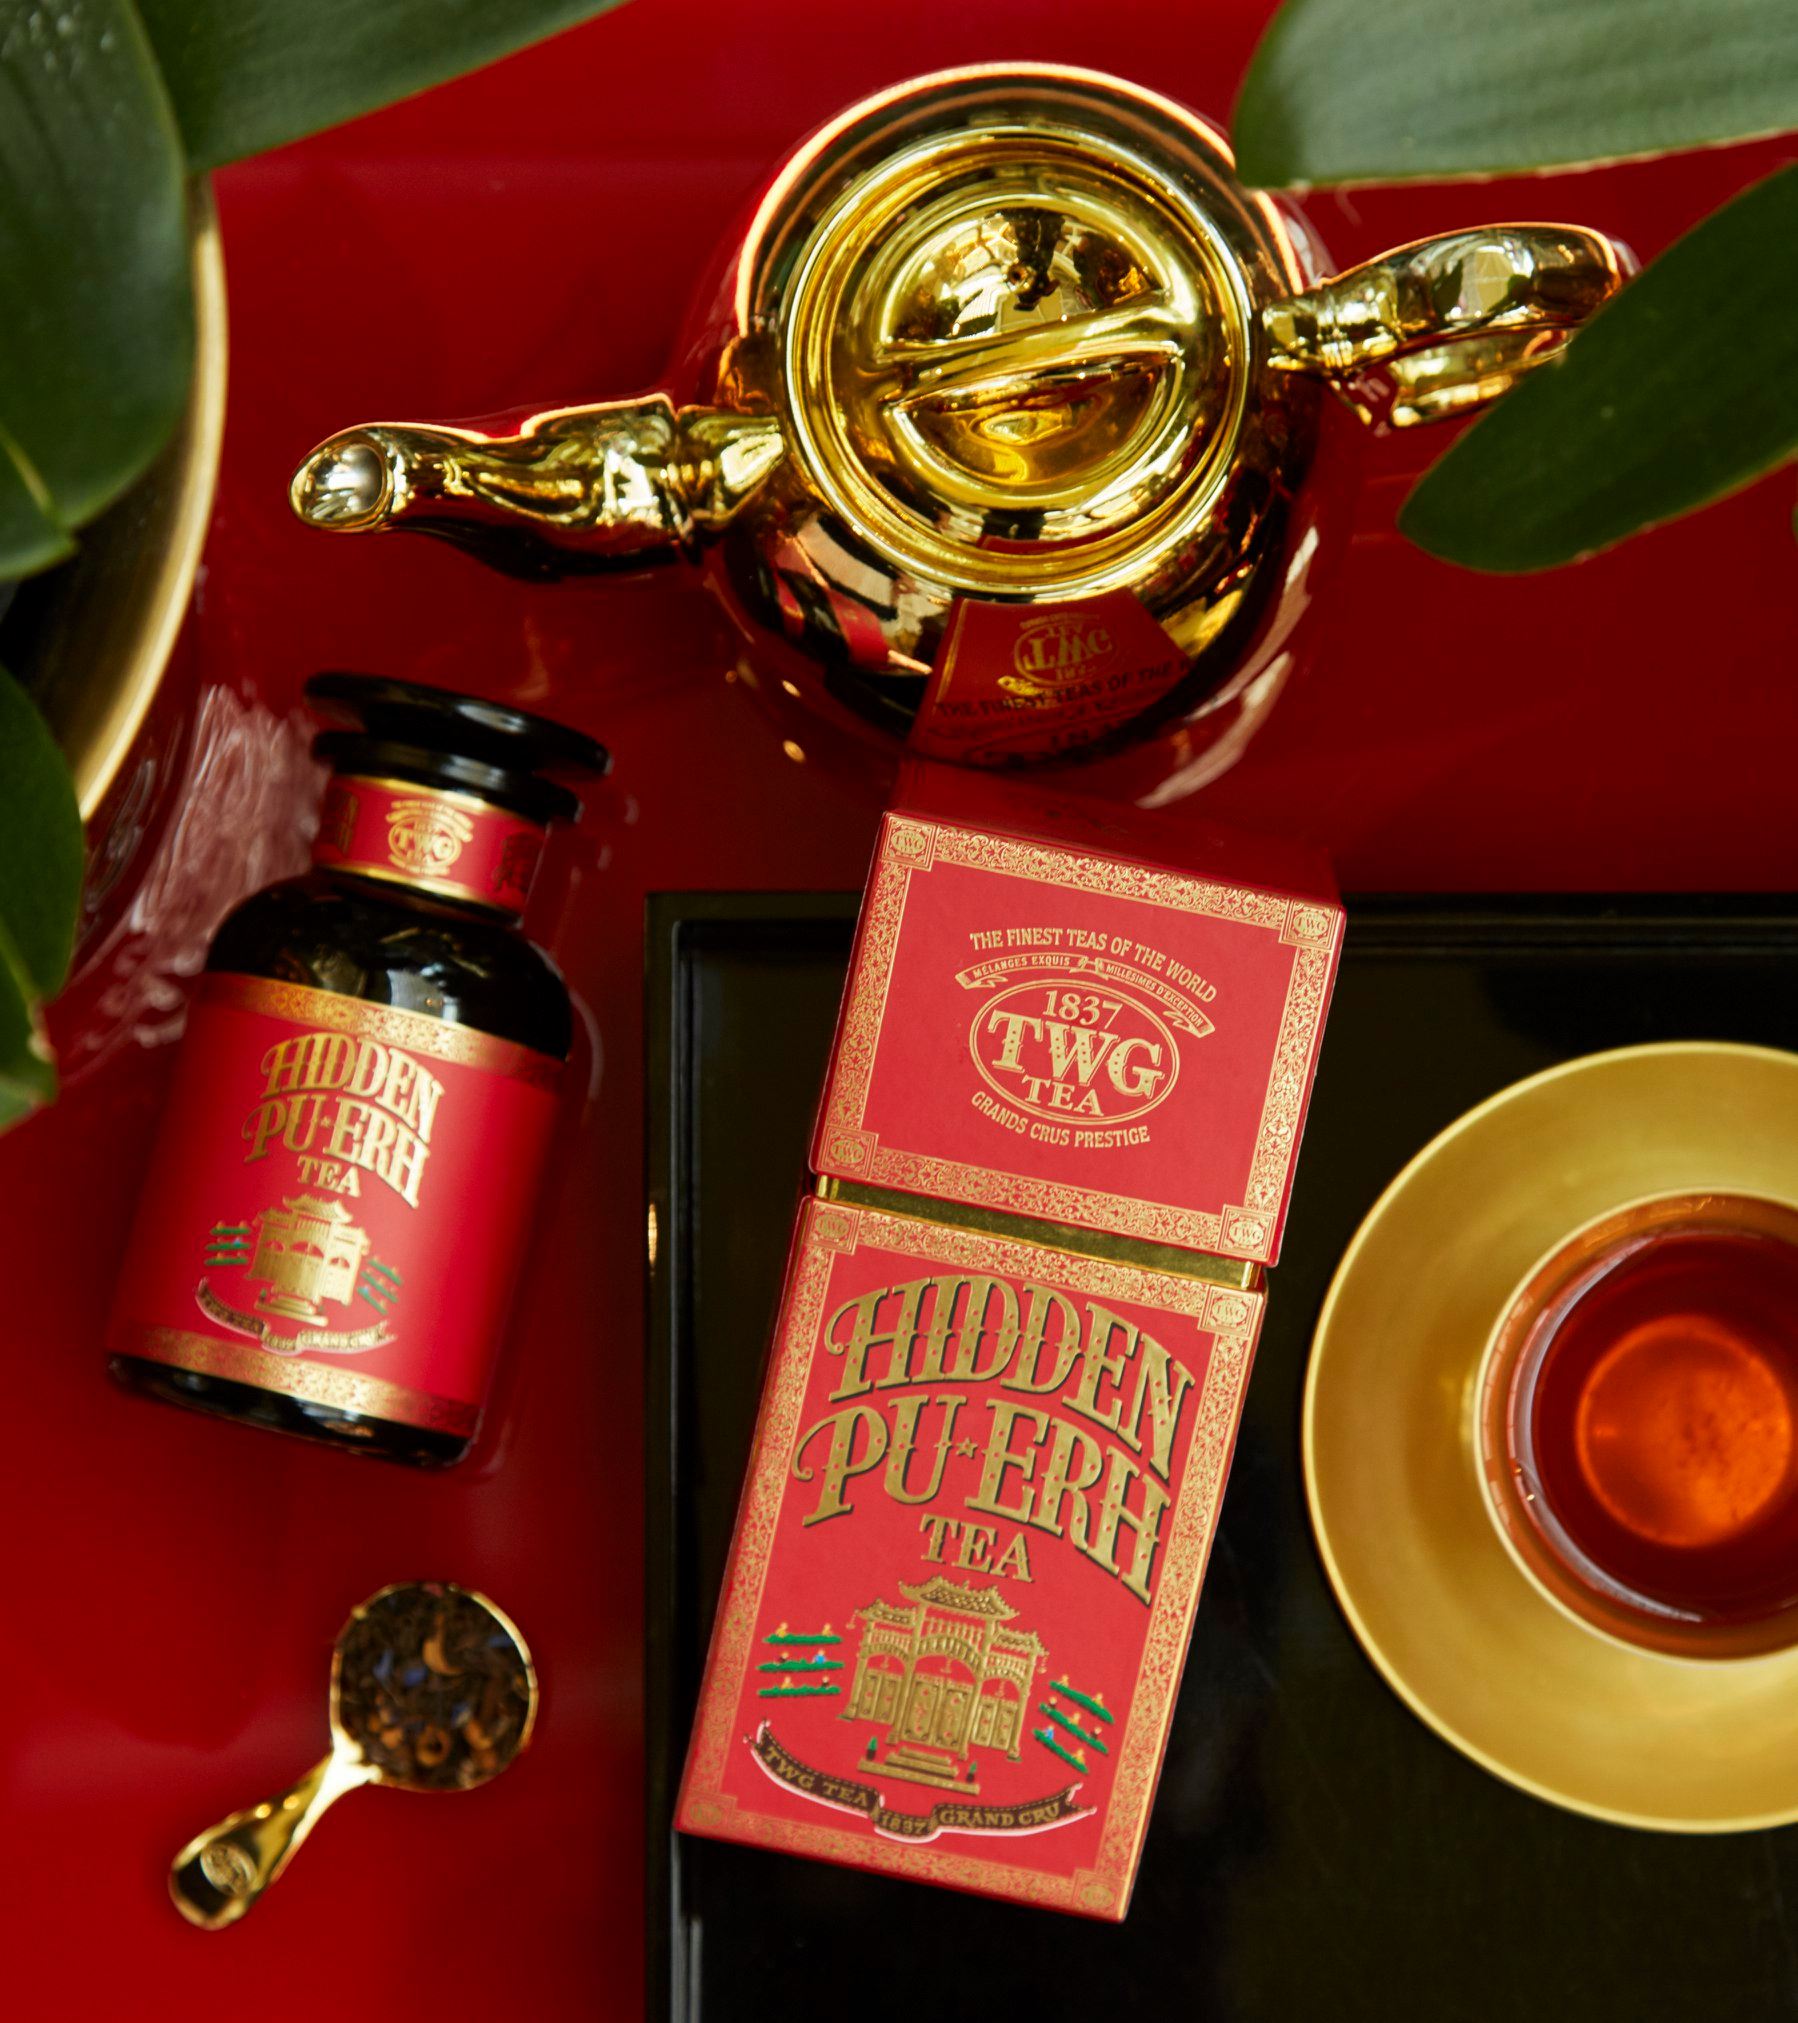 Daring to break the tradition, the Hidden Pu-Erh Tea is TWG Tea’s festive, limited edition creation this Lunar New Year. Available online and instores, this earthy, matured black tea has been refashioned with wild forest berries and flowers, yielding a surprisingly indescribable aroma. Shop now at TWGTea.Com.